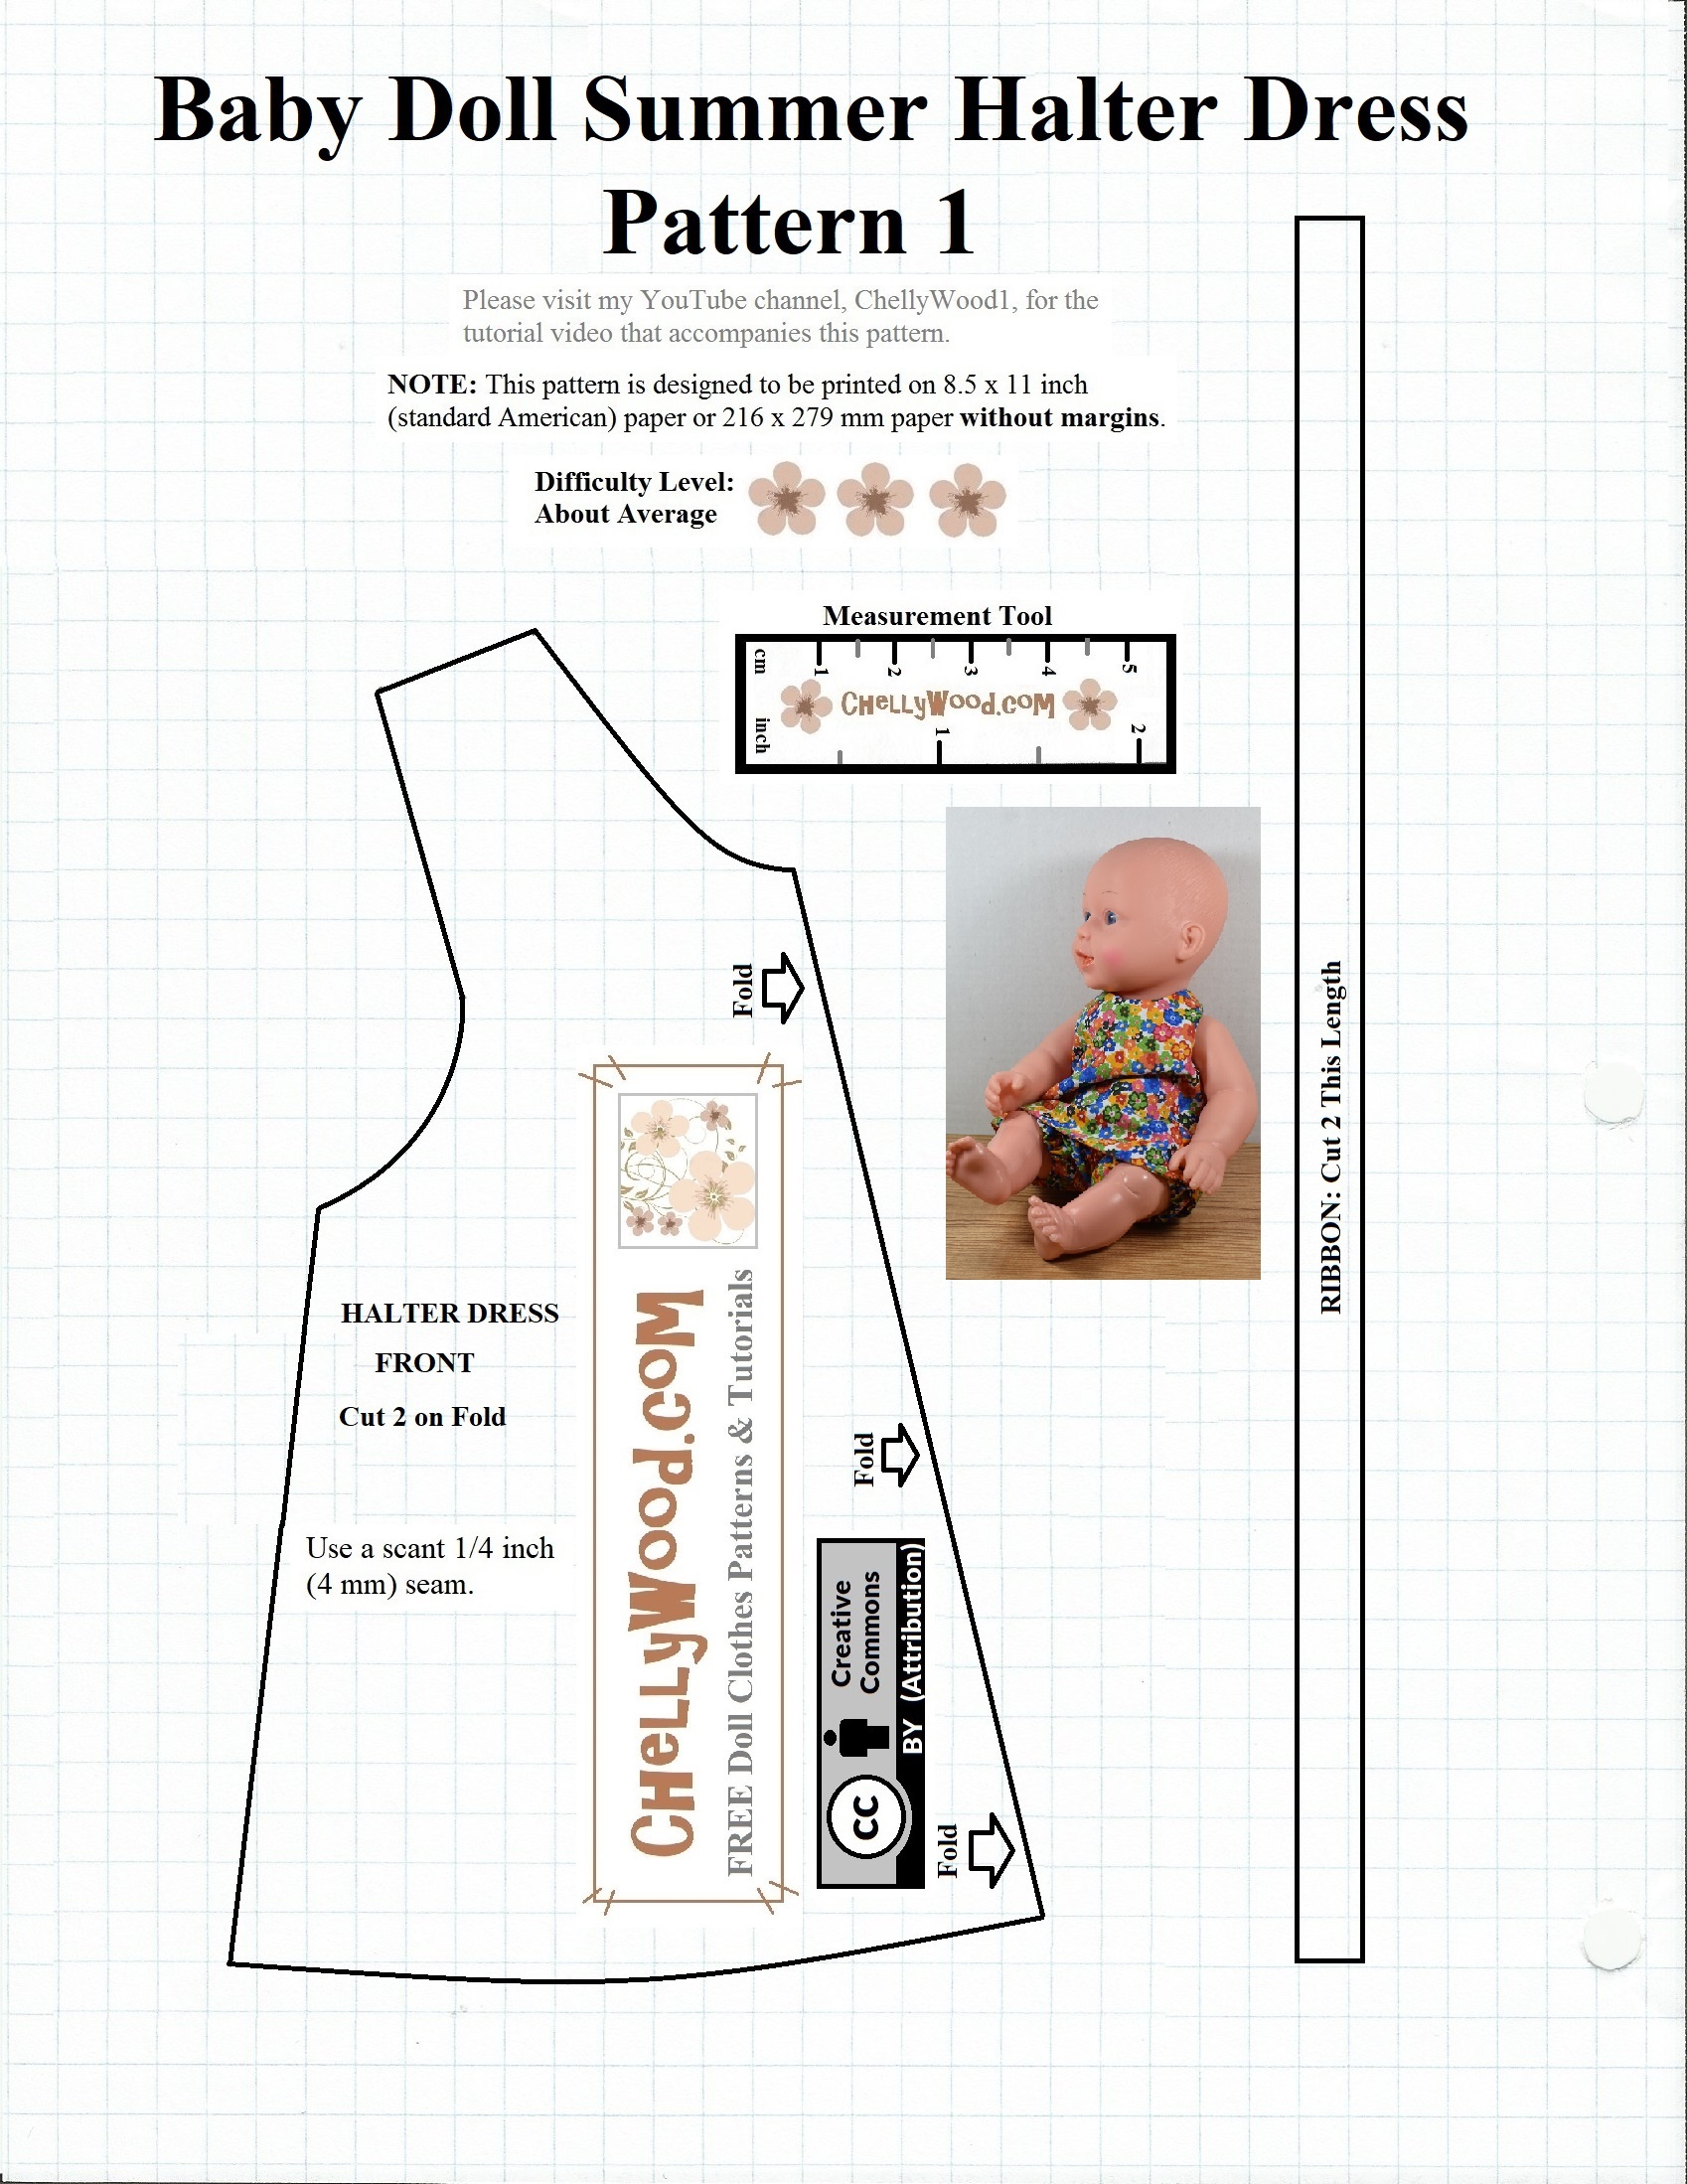 Free #sewing Pattern For Baby #dolls @ Chellywood #crafts – Free - Free Printable Sewing Patterns